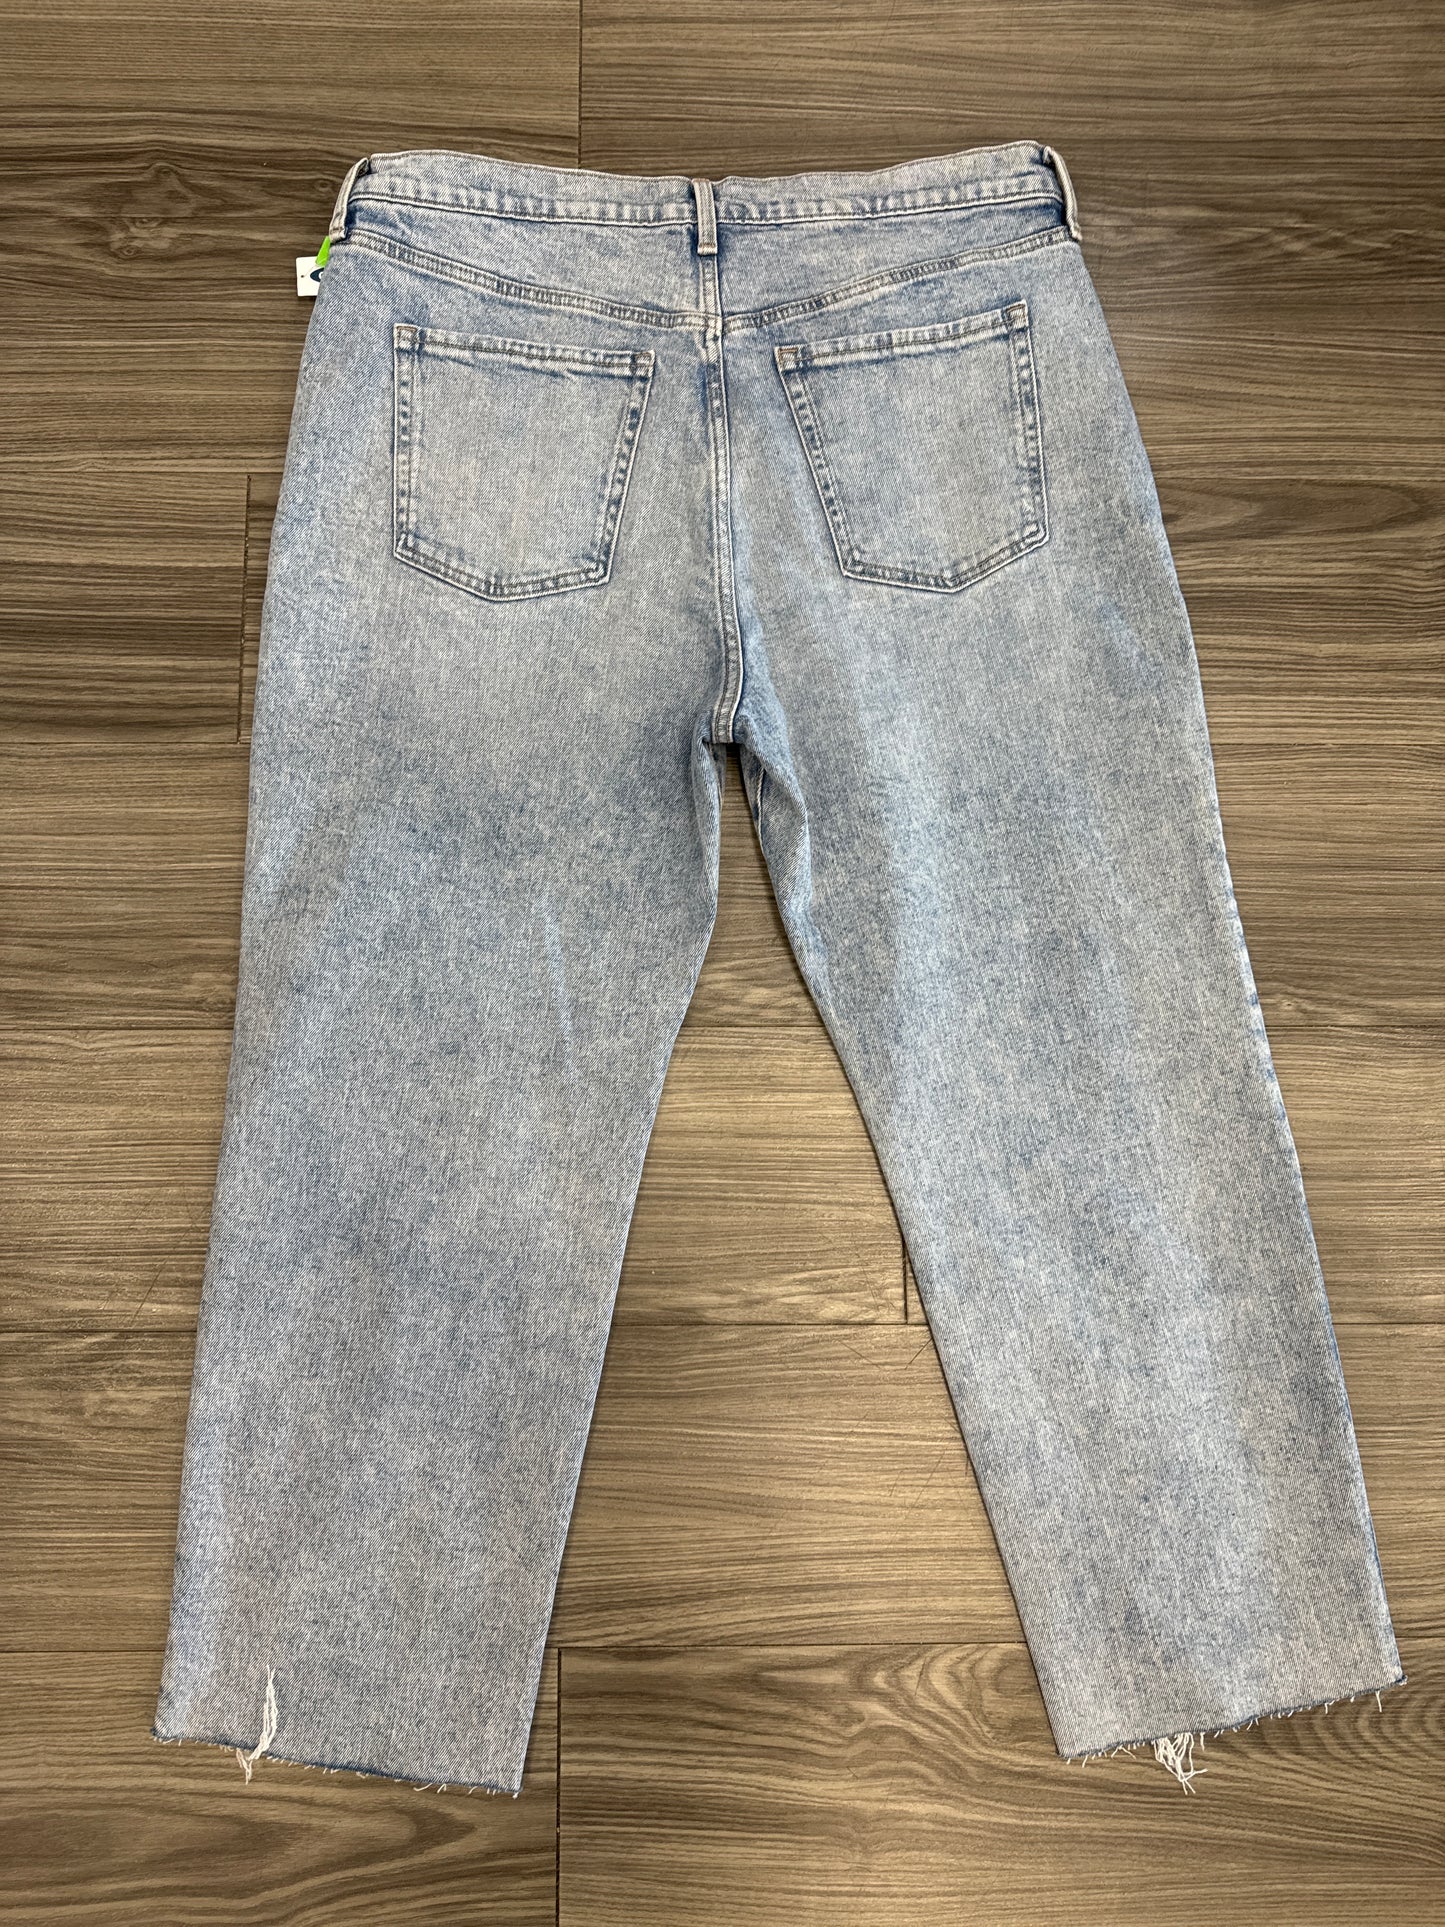 Jeans Relaxed/boyfriend By Old Navy  Size: 16